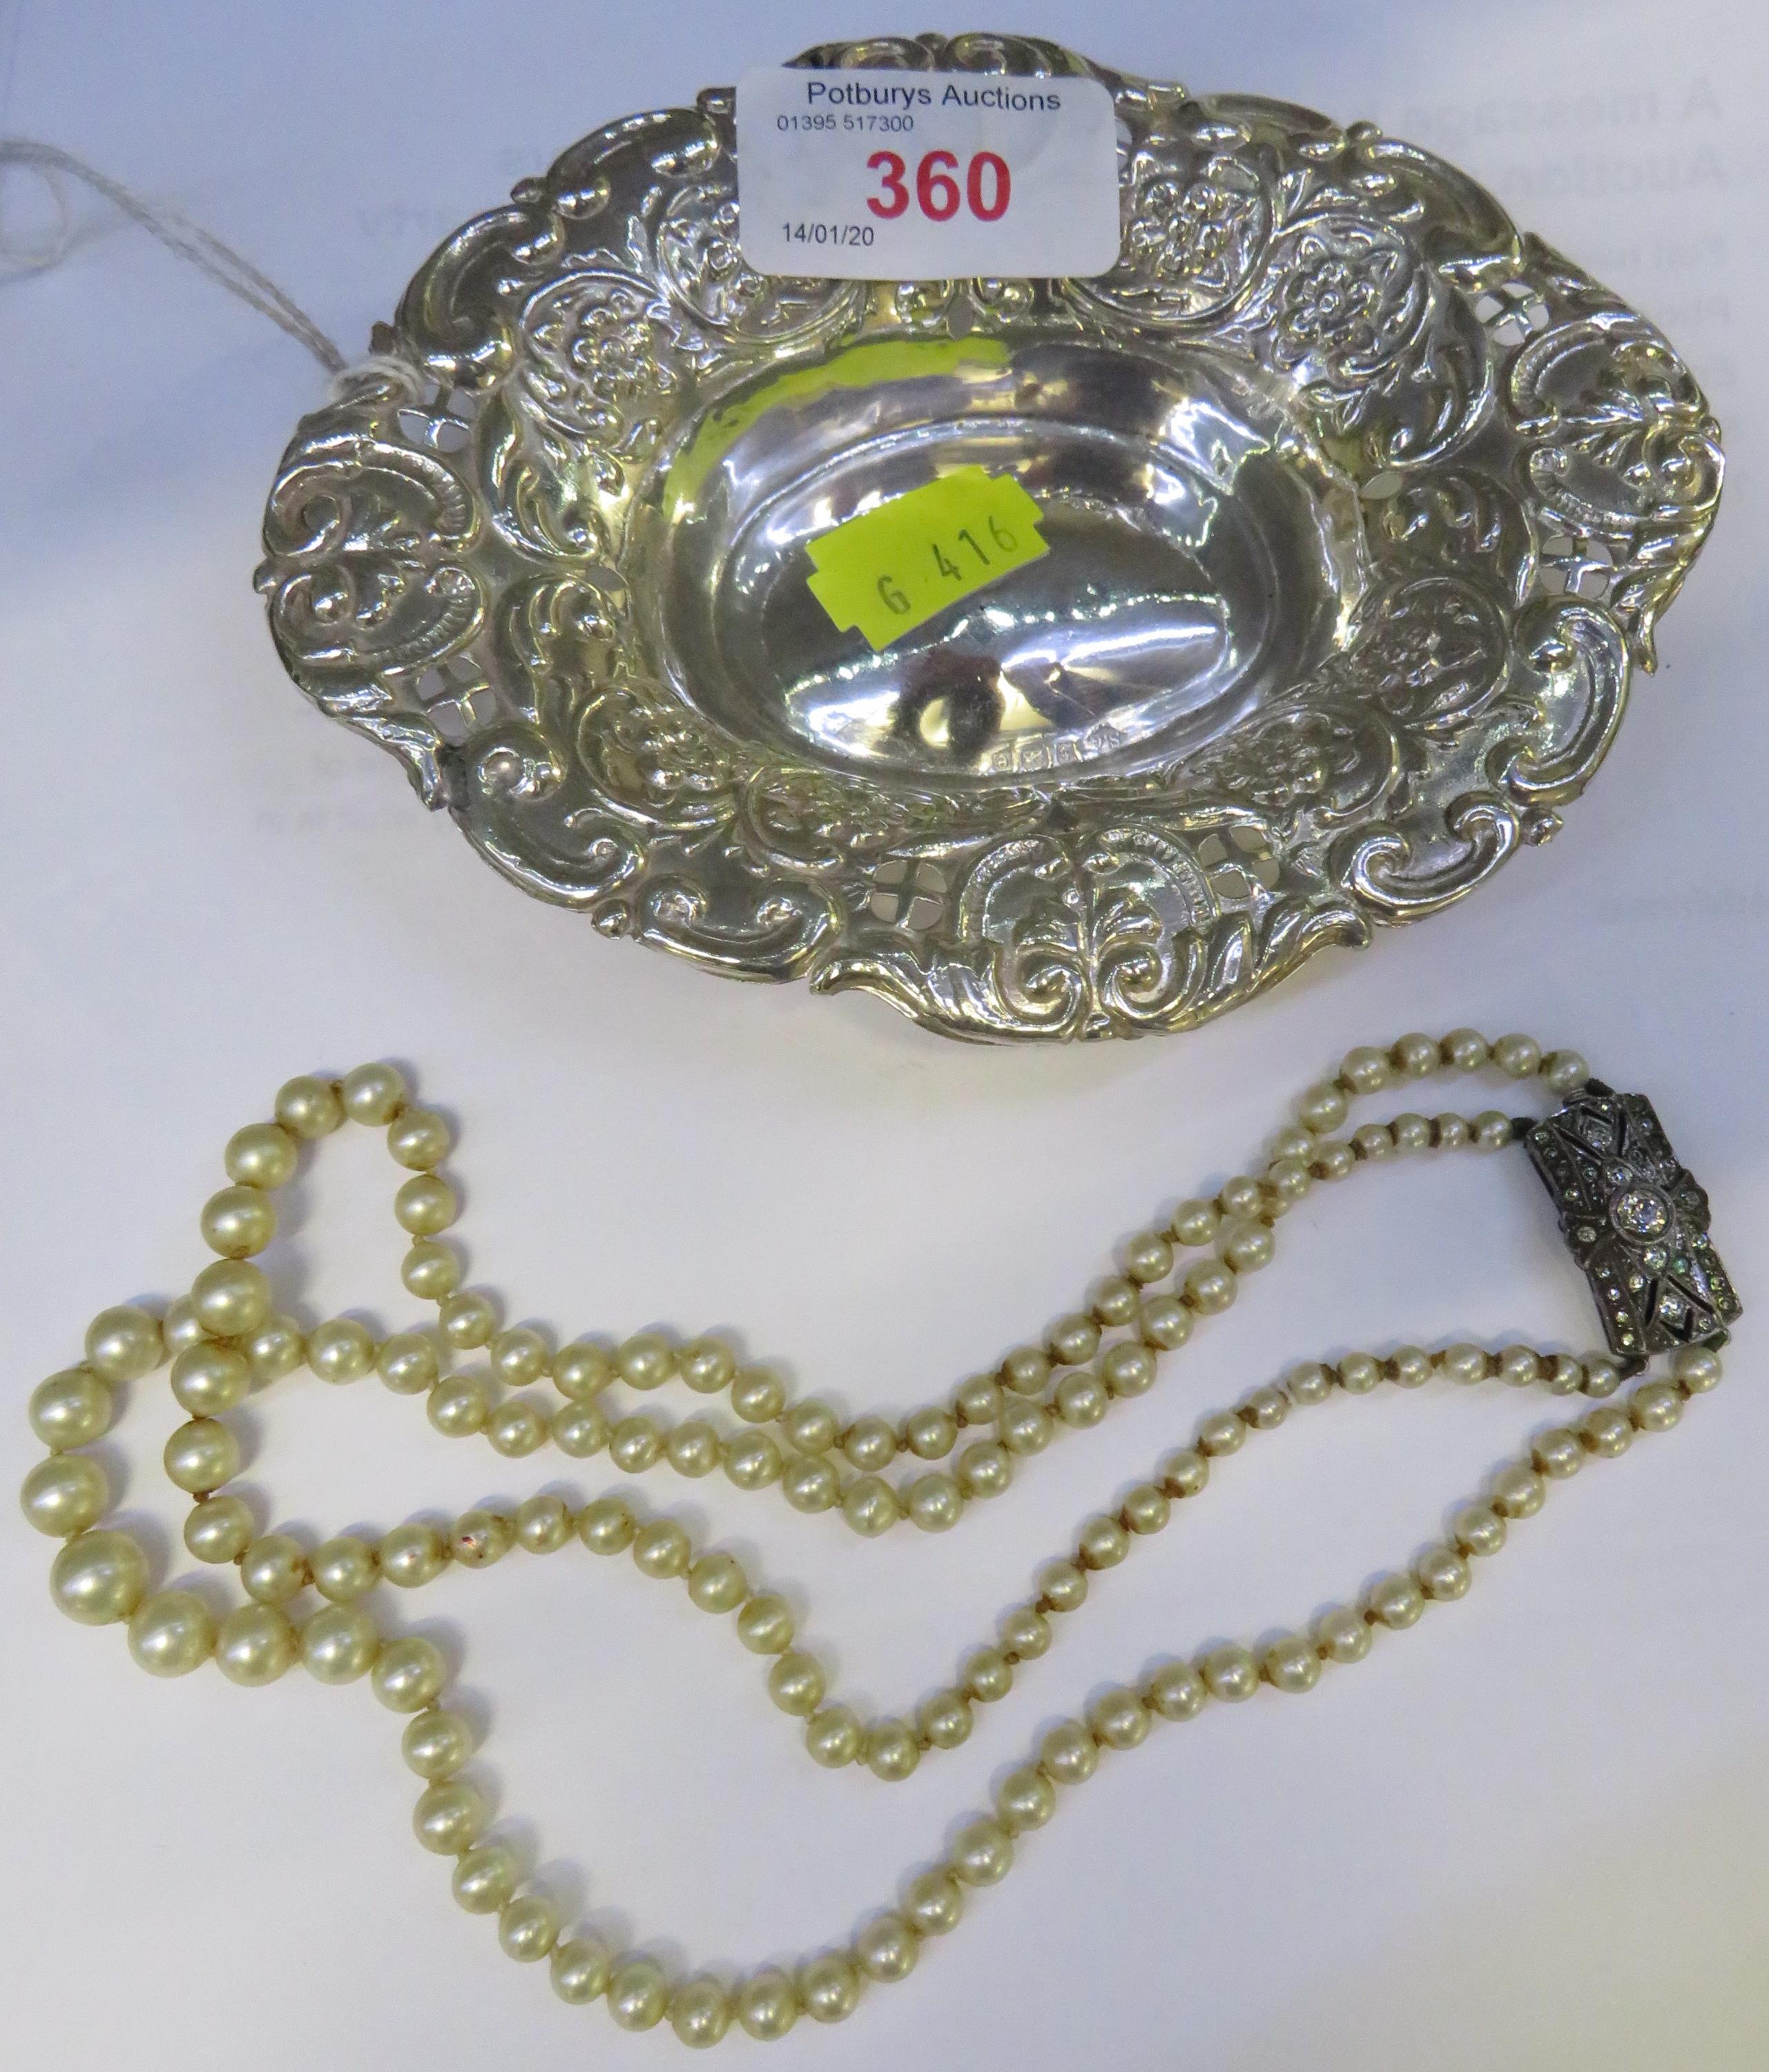 SILVER BONBON DISH, BIRMINGHAM, 1.1 OZT, TOGETHER WITH SIMULATED PEARL NECKLACE WITH CLASP STAMPED